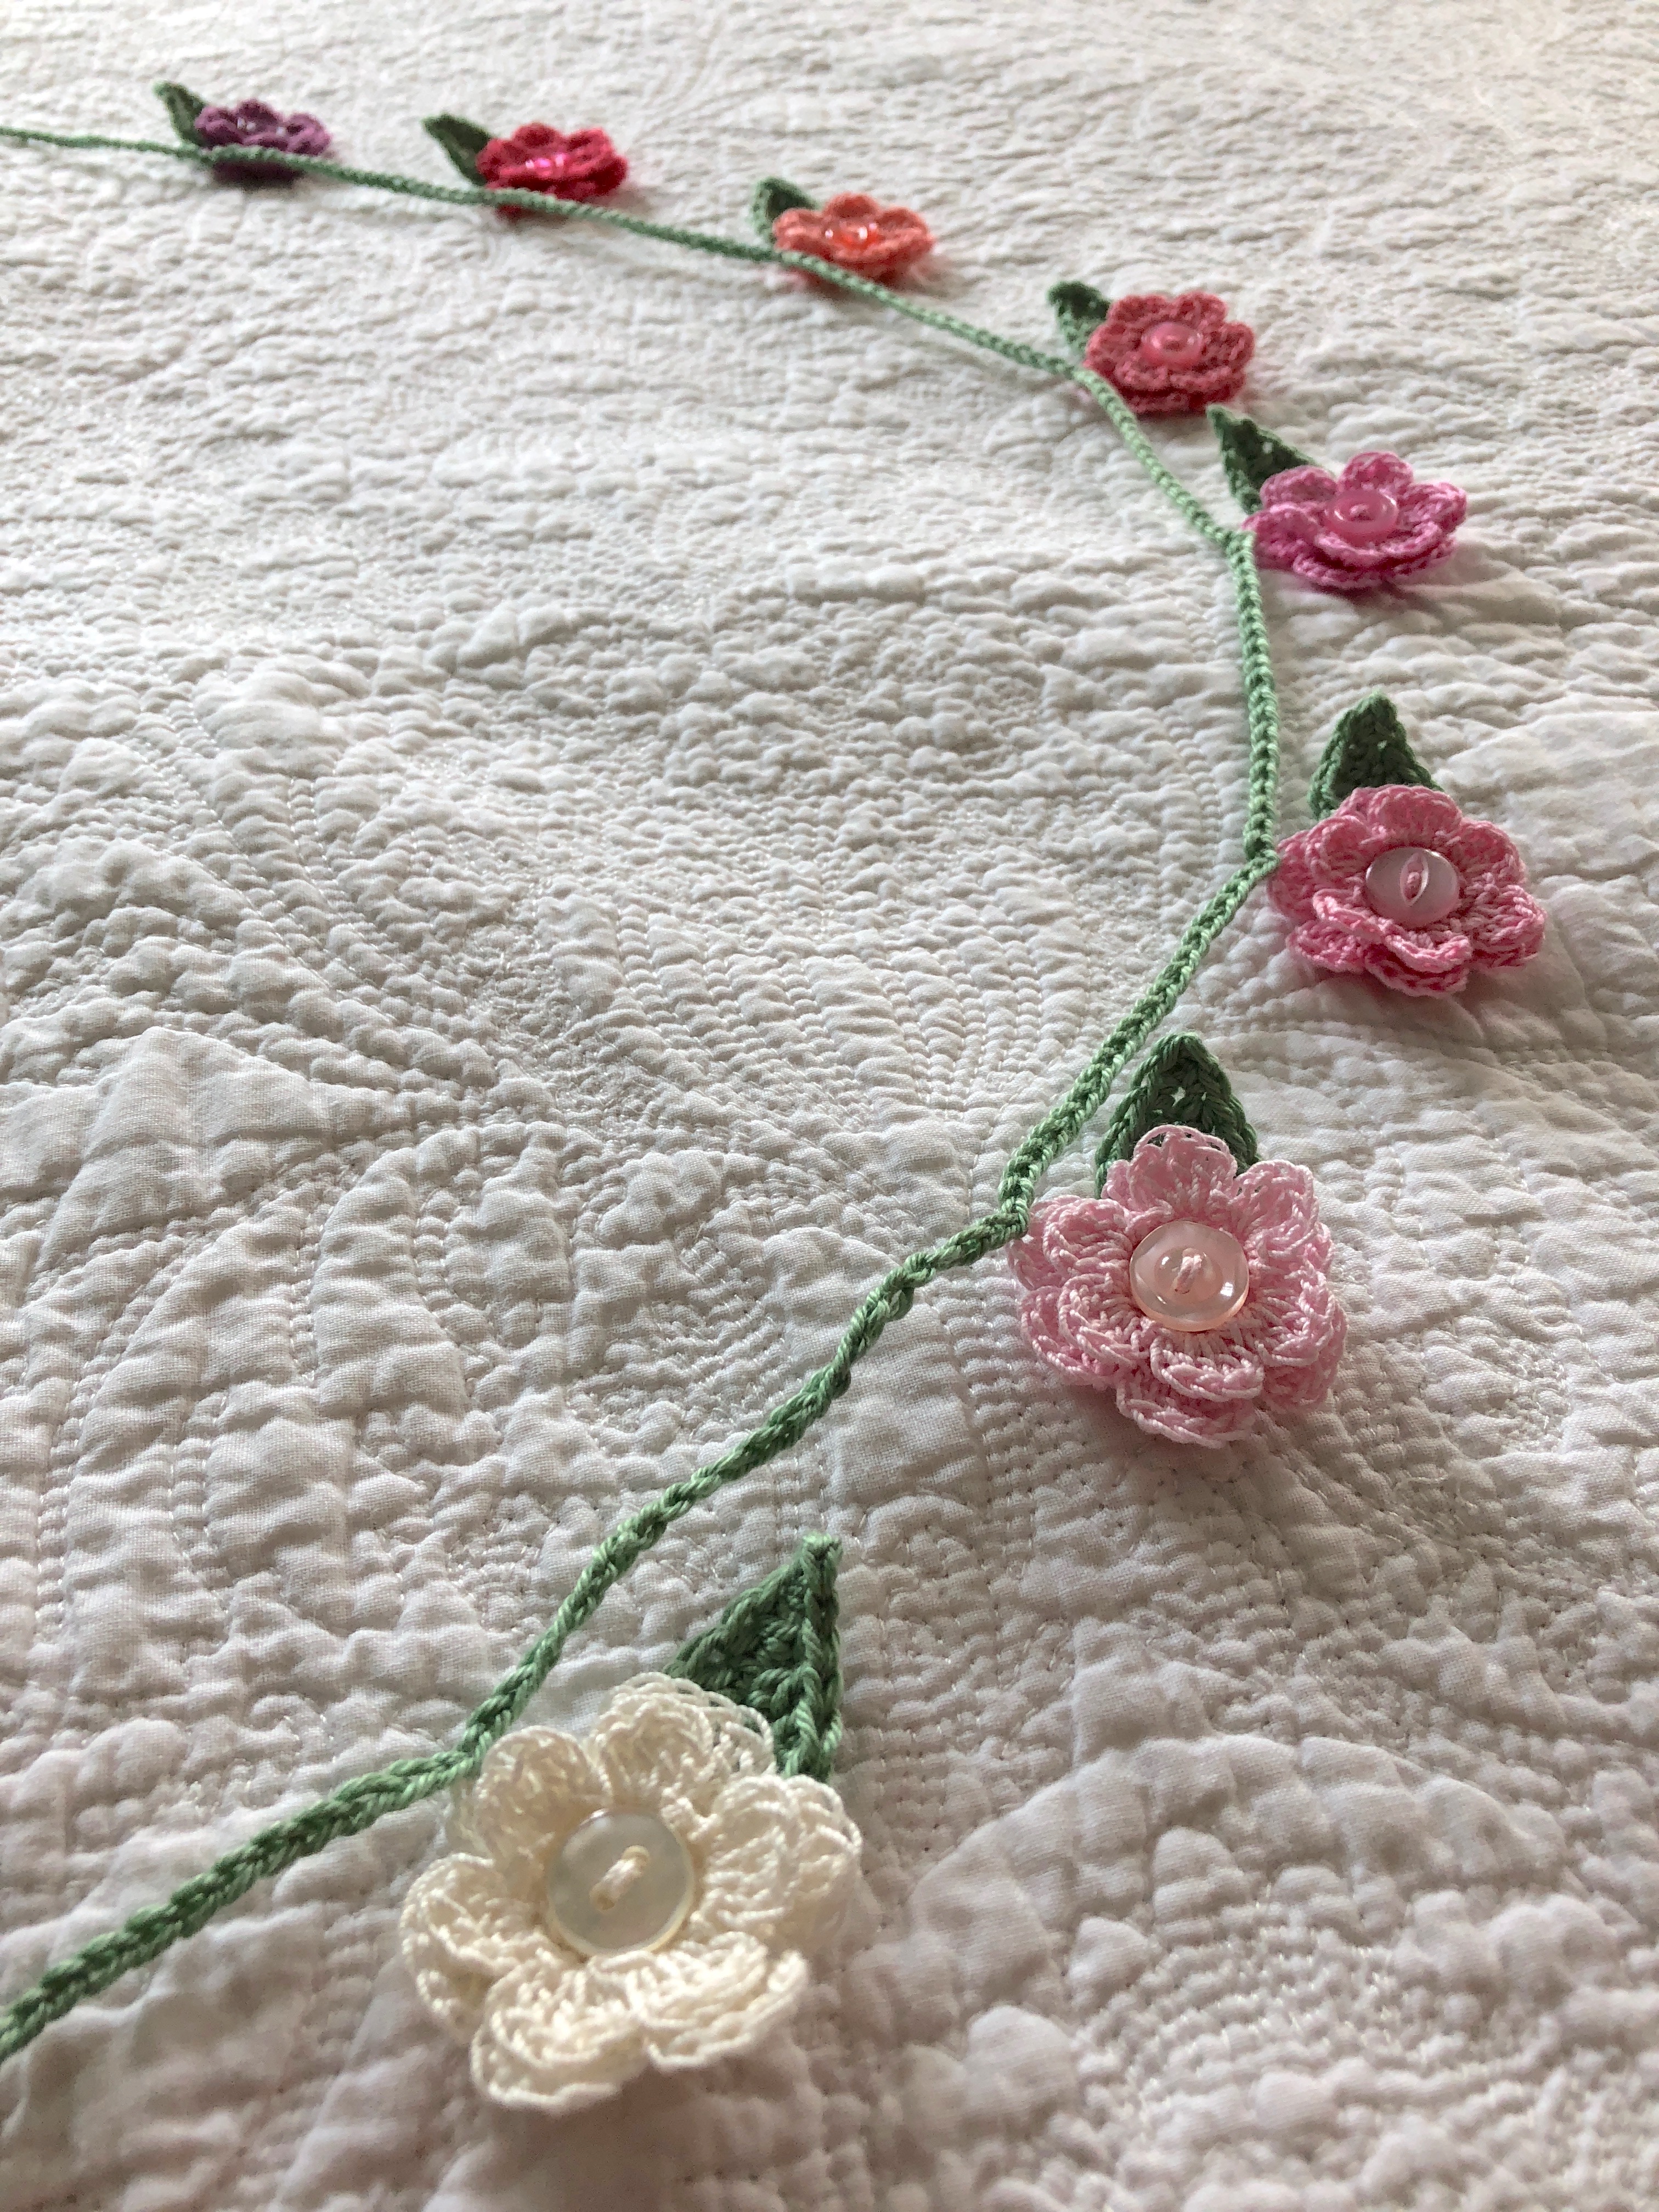 A hand crocheted small flower and leaf garland in graduated colour way from white through pinks to purple.